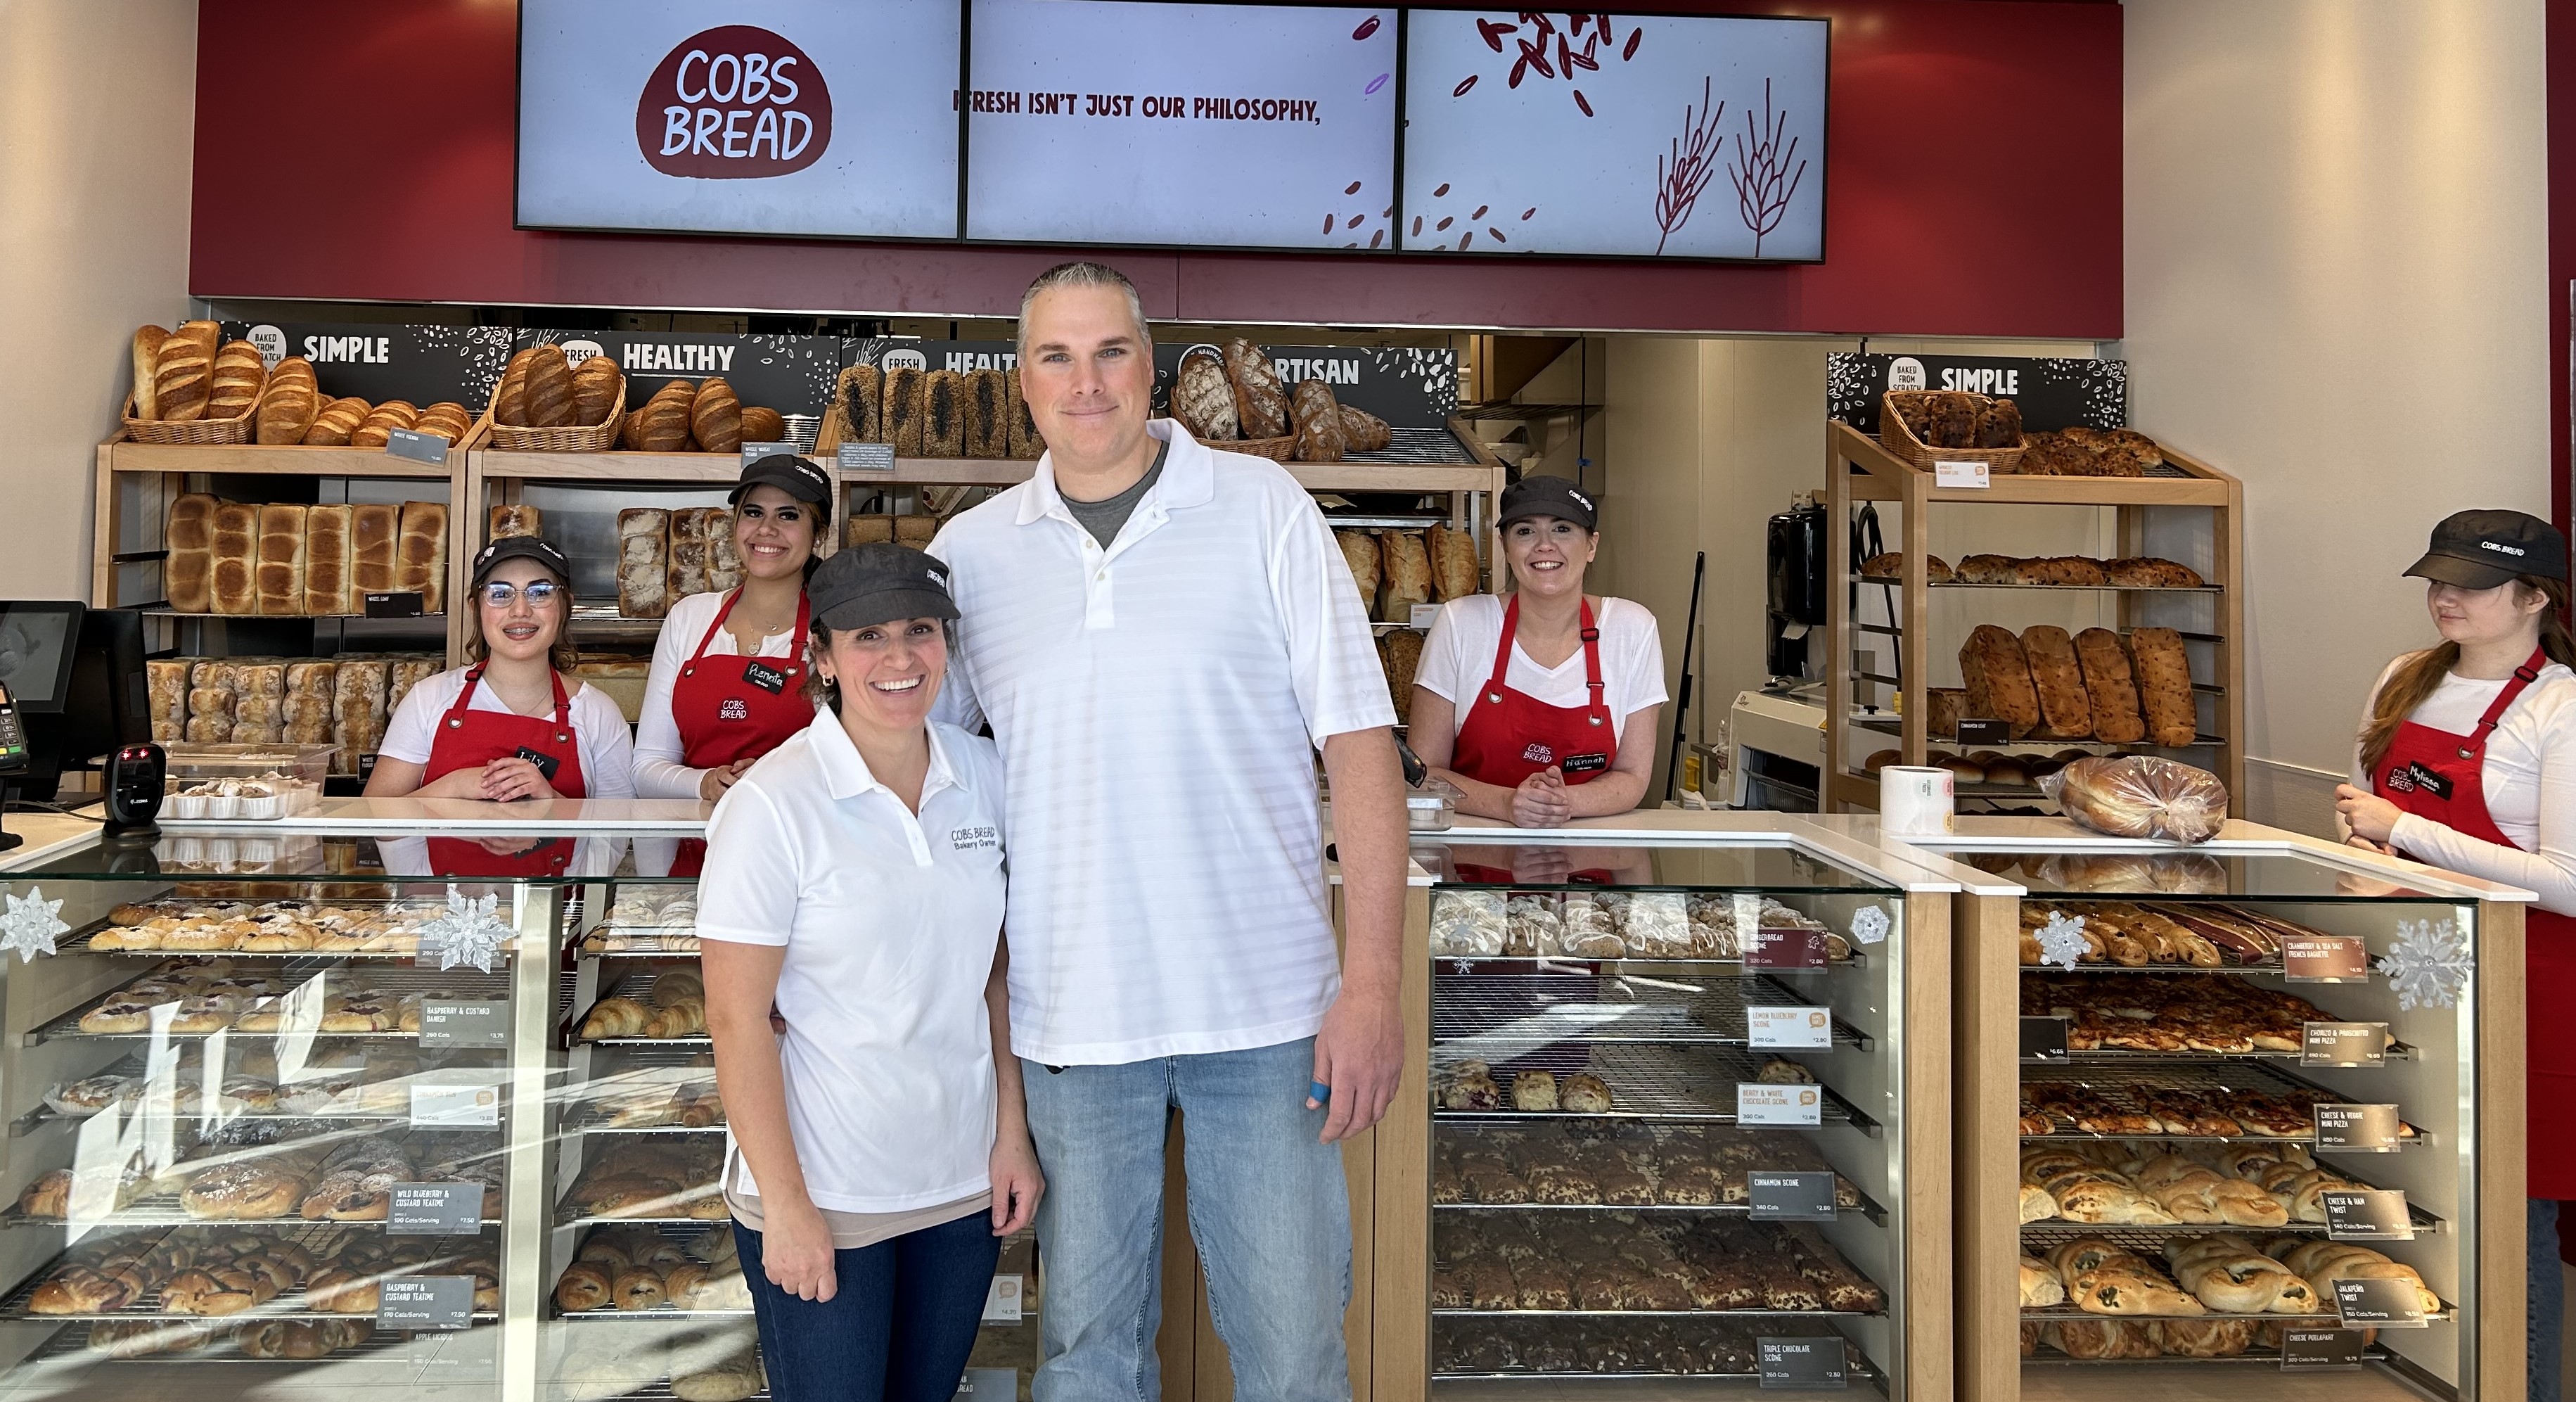 Owner Mary Deltin her husband and team at Cobs Bread